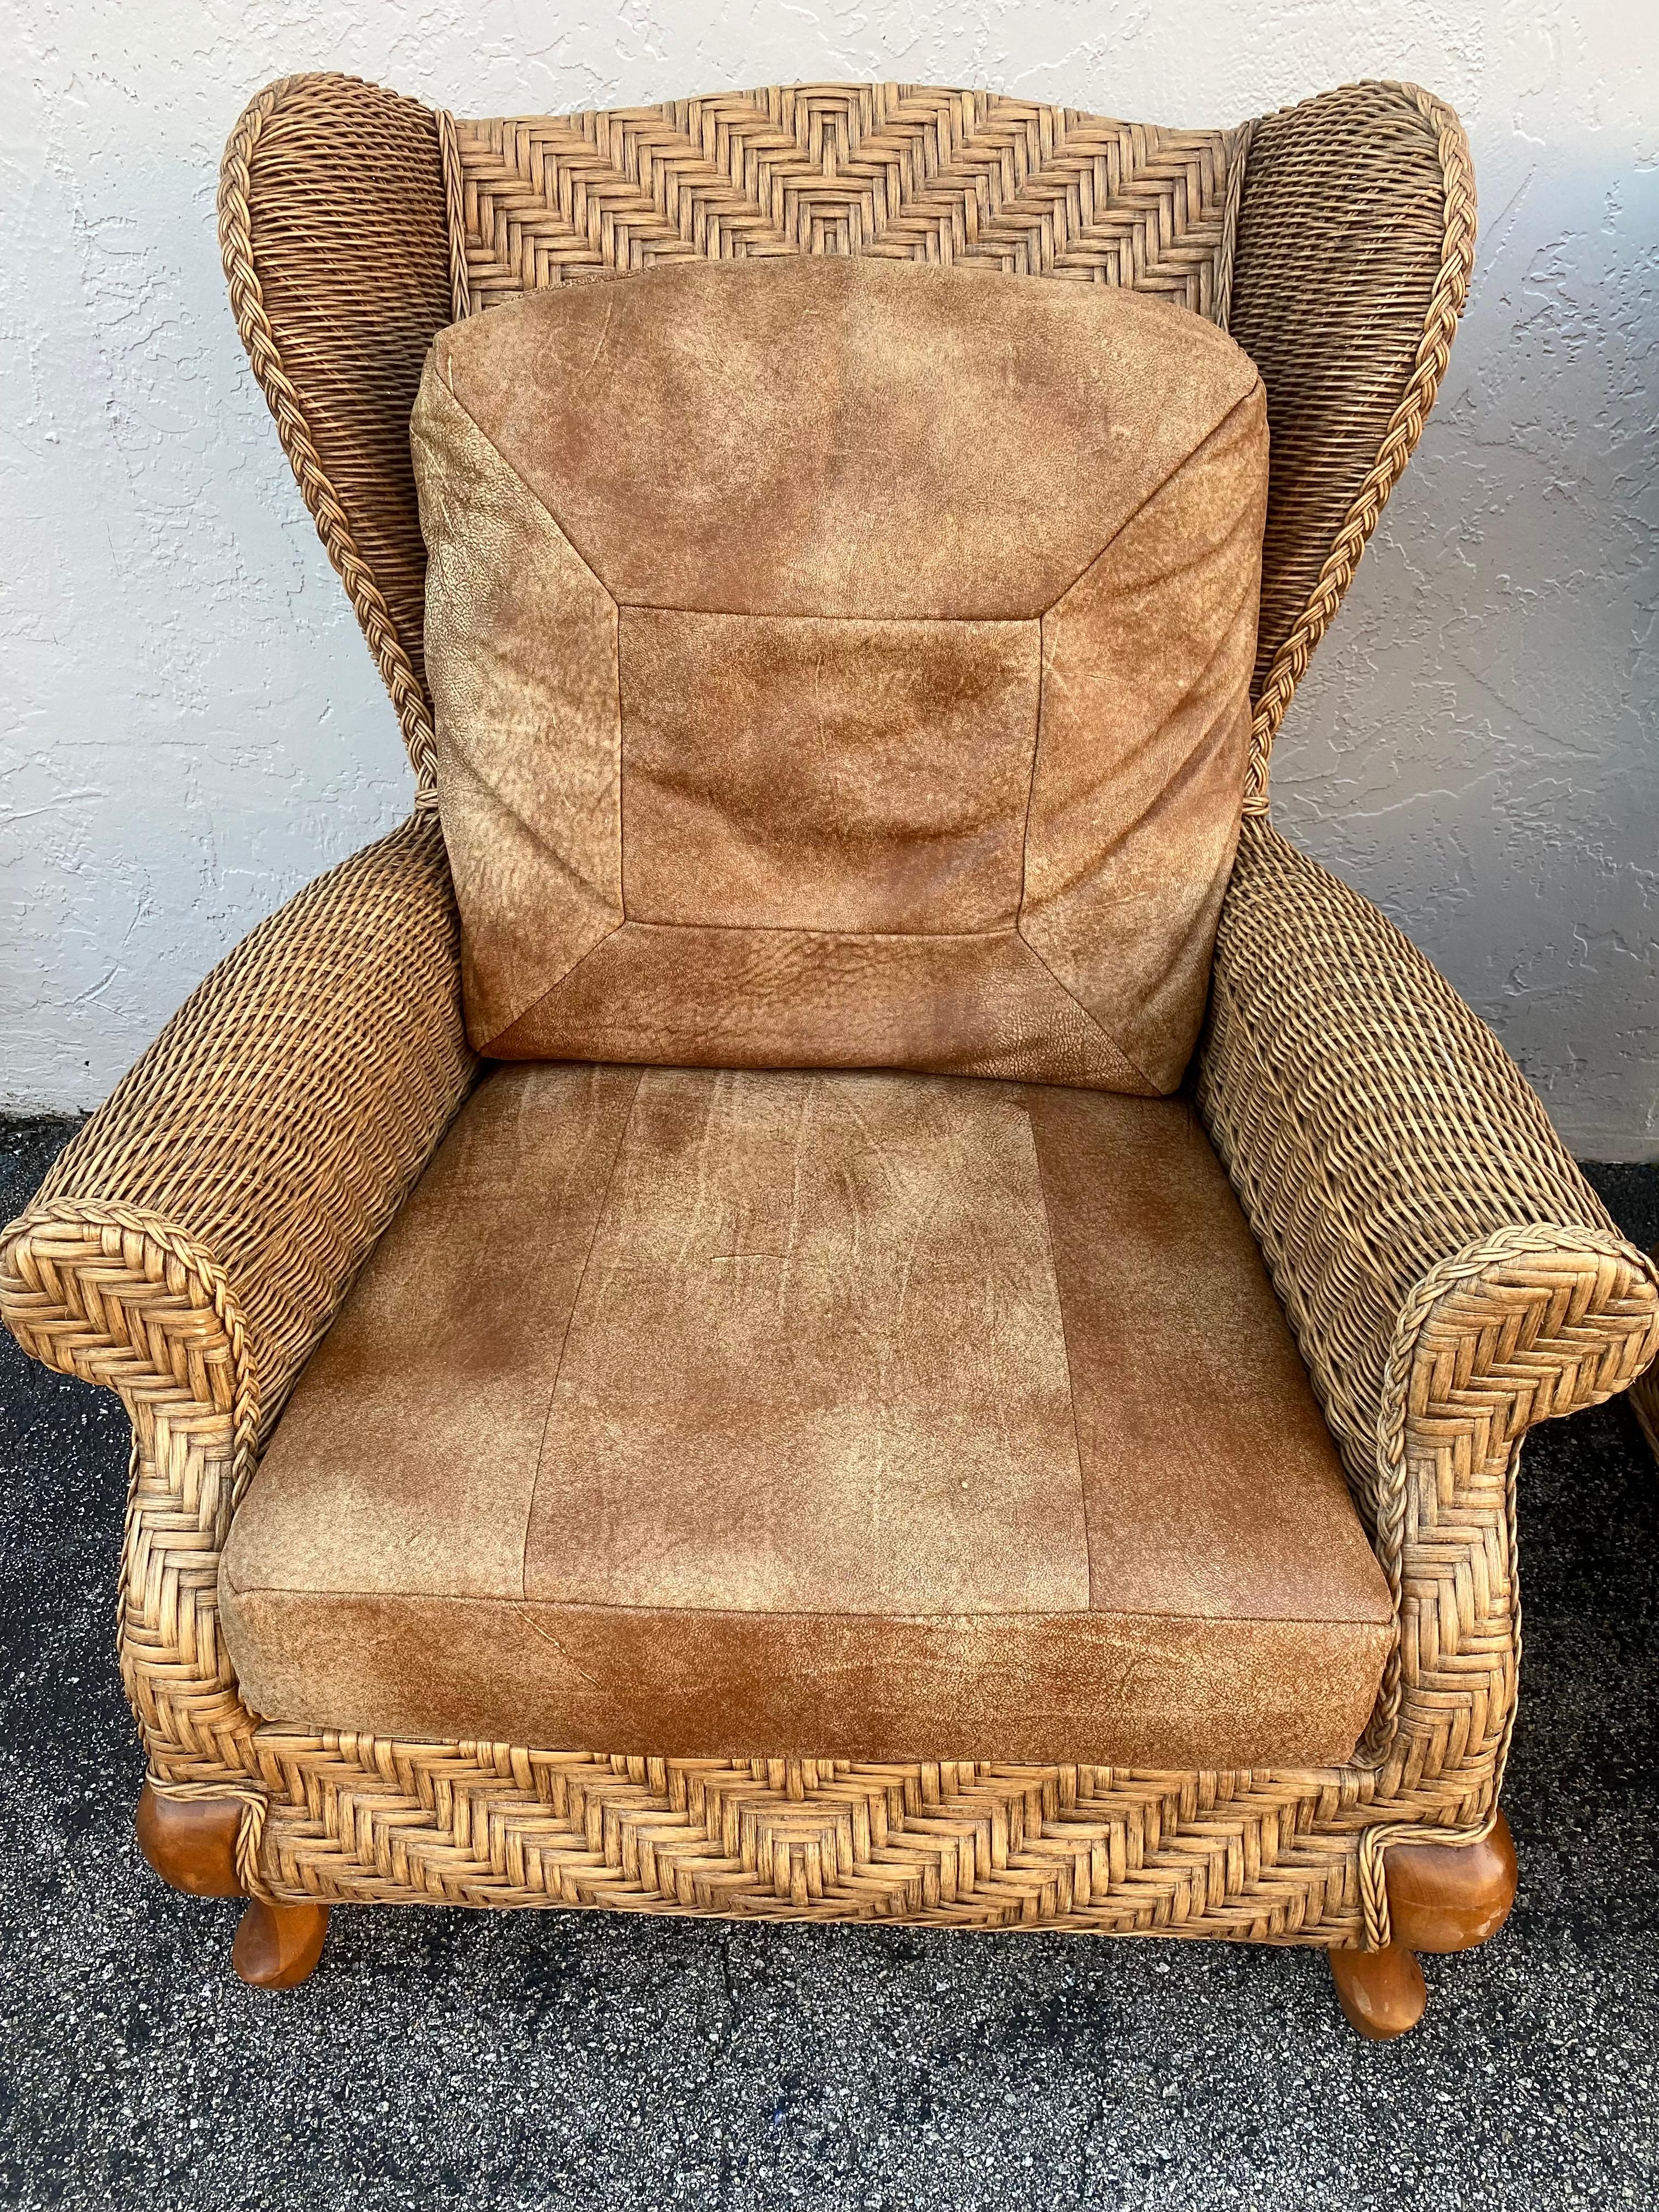 Late 20th Century 1980s Rattan Queen Anne Style XL Wingback Chairs, Set of 2 For Sale